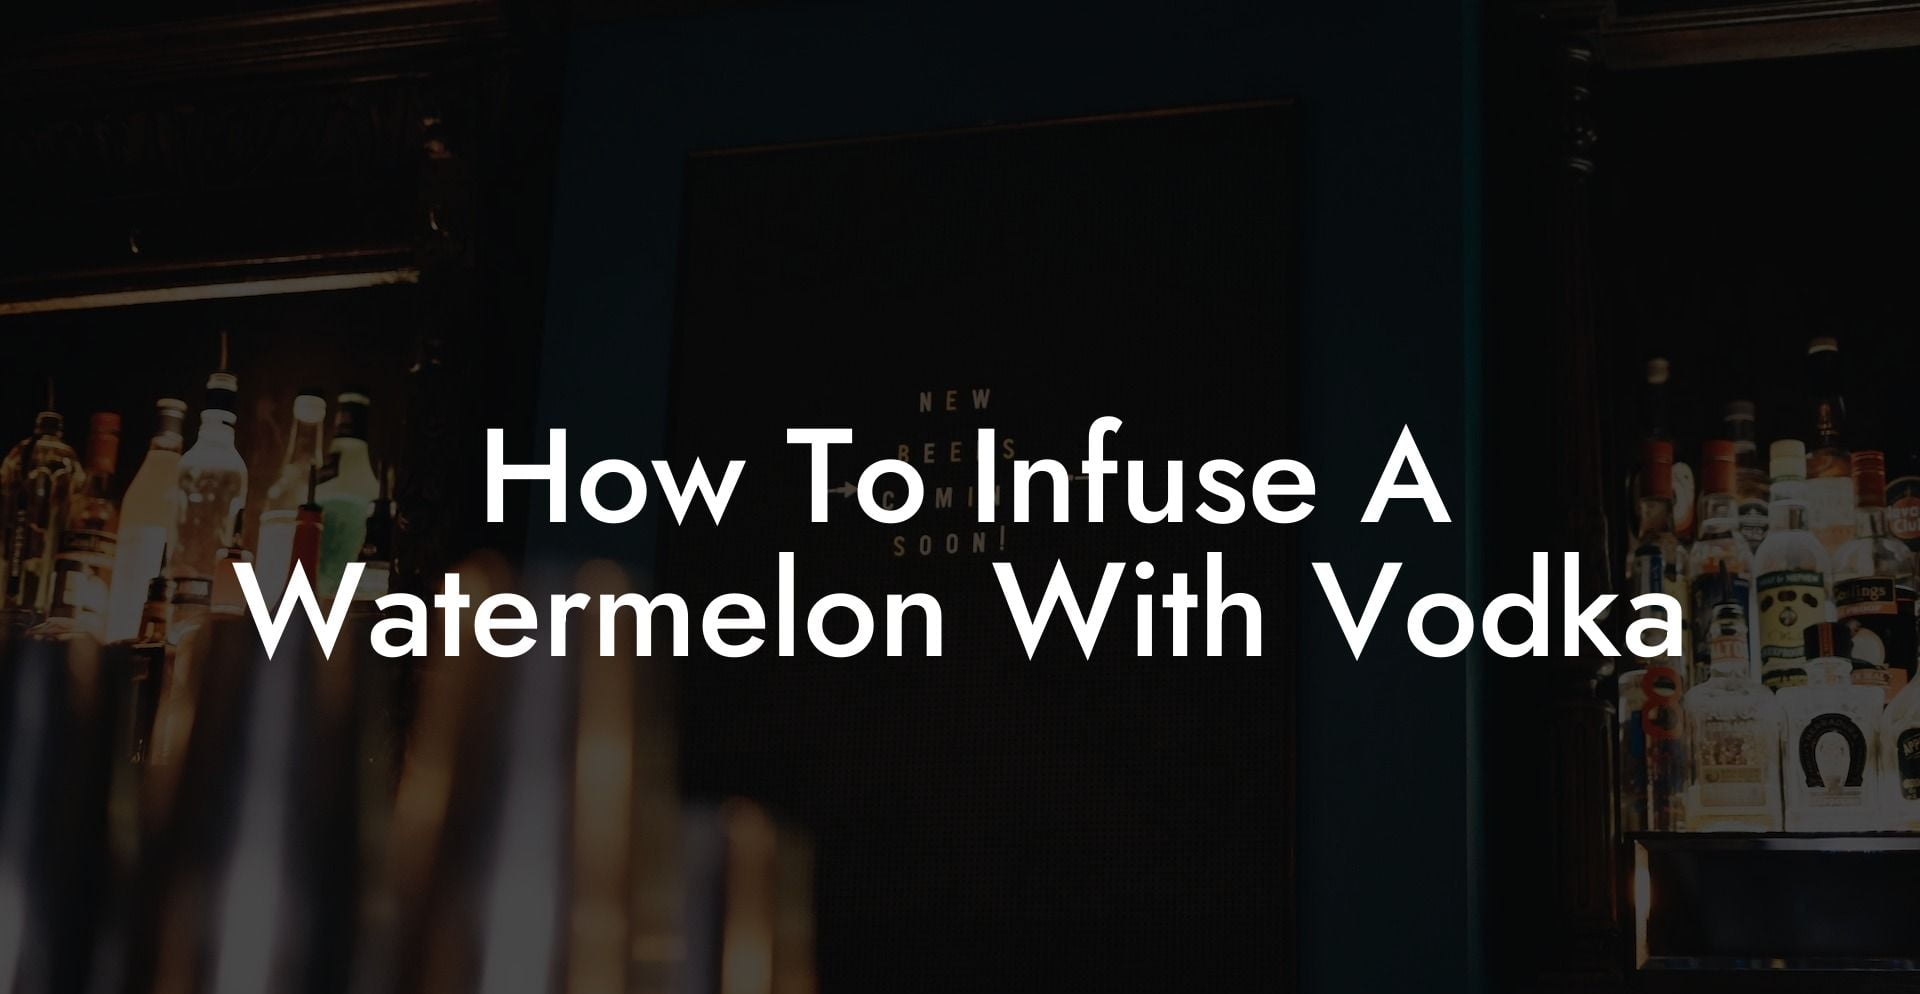 How To Infuse A Watermelon With Vodka